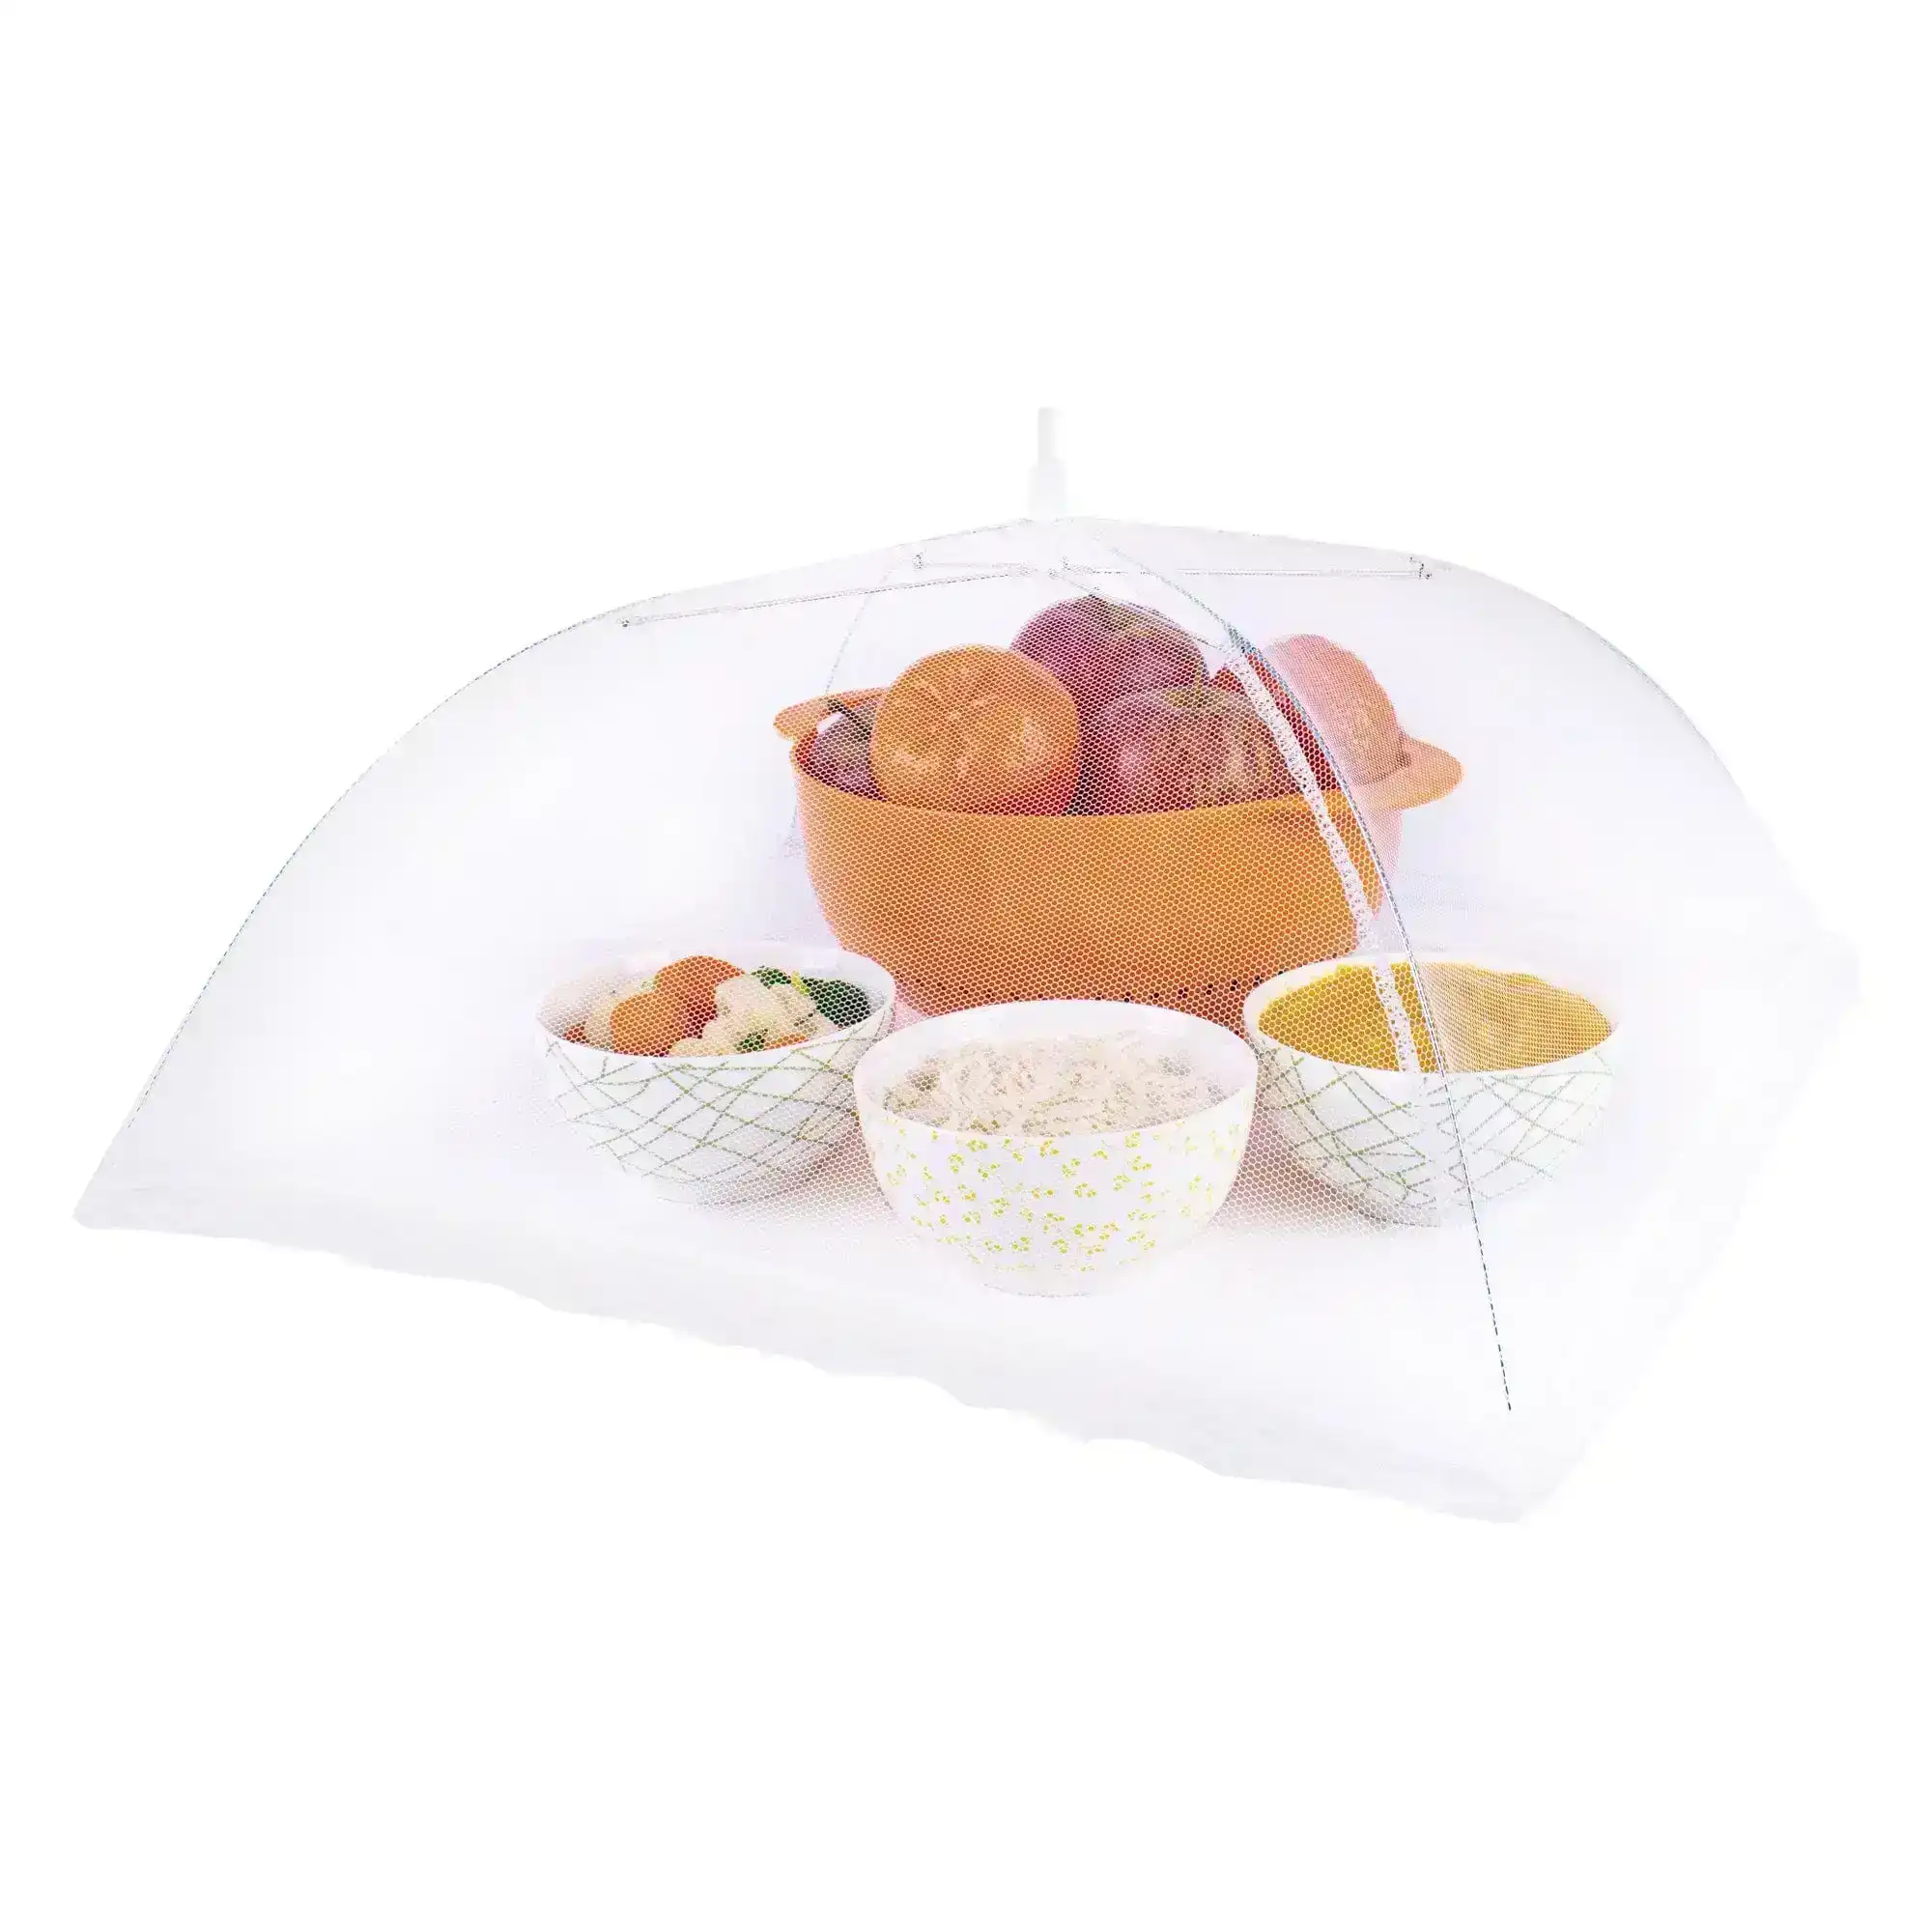 33cm Square Net Food Cover